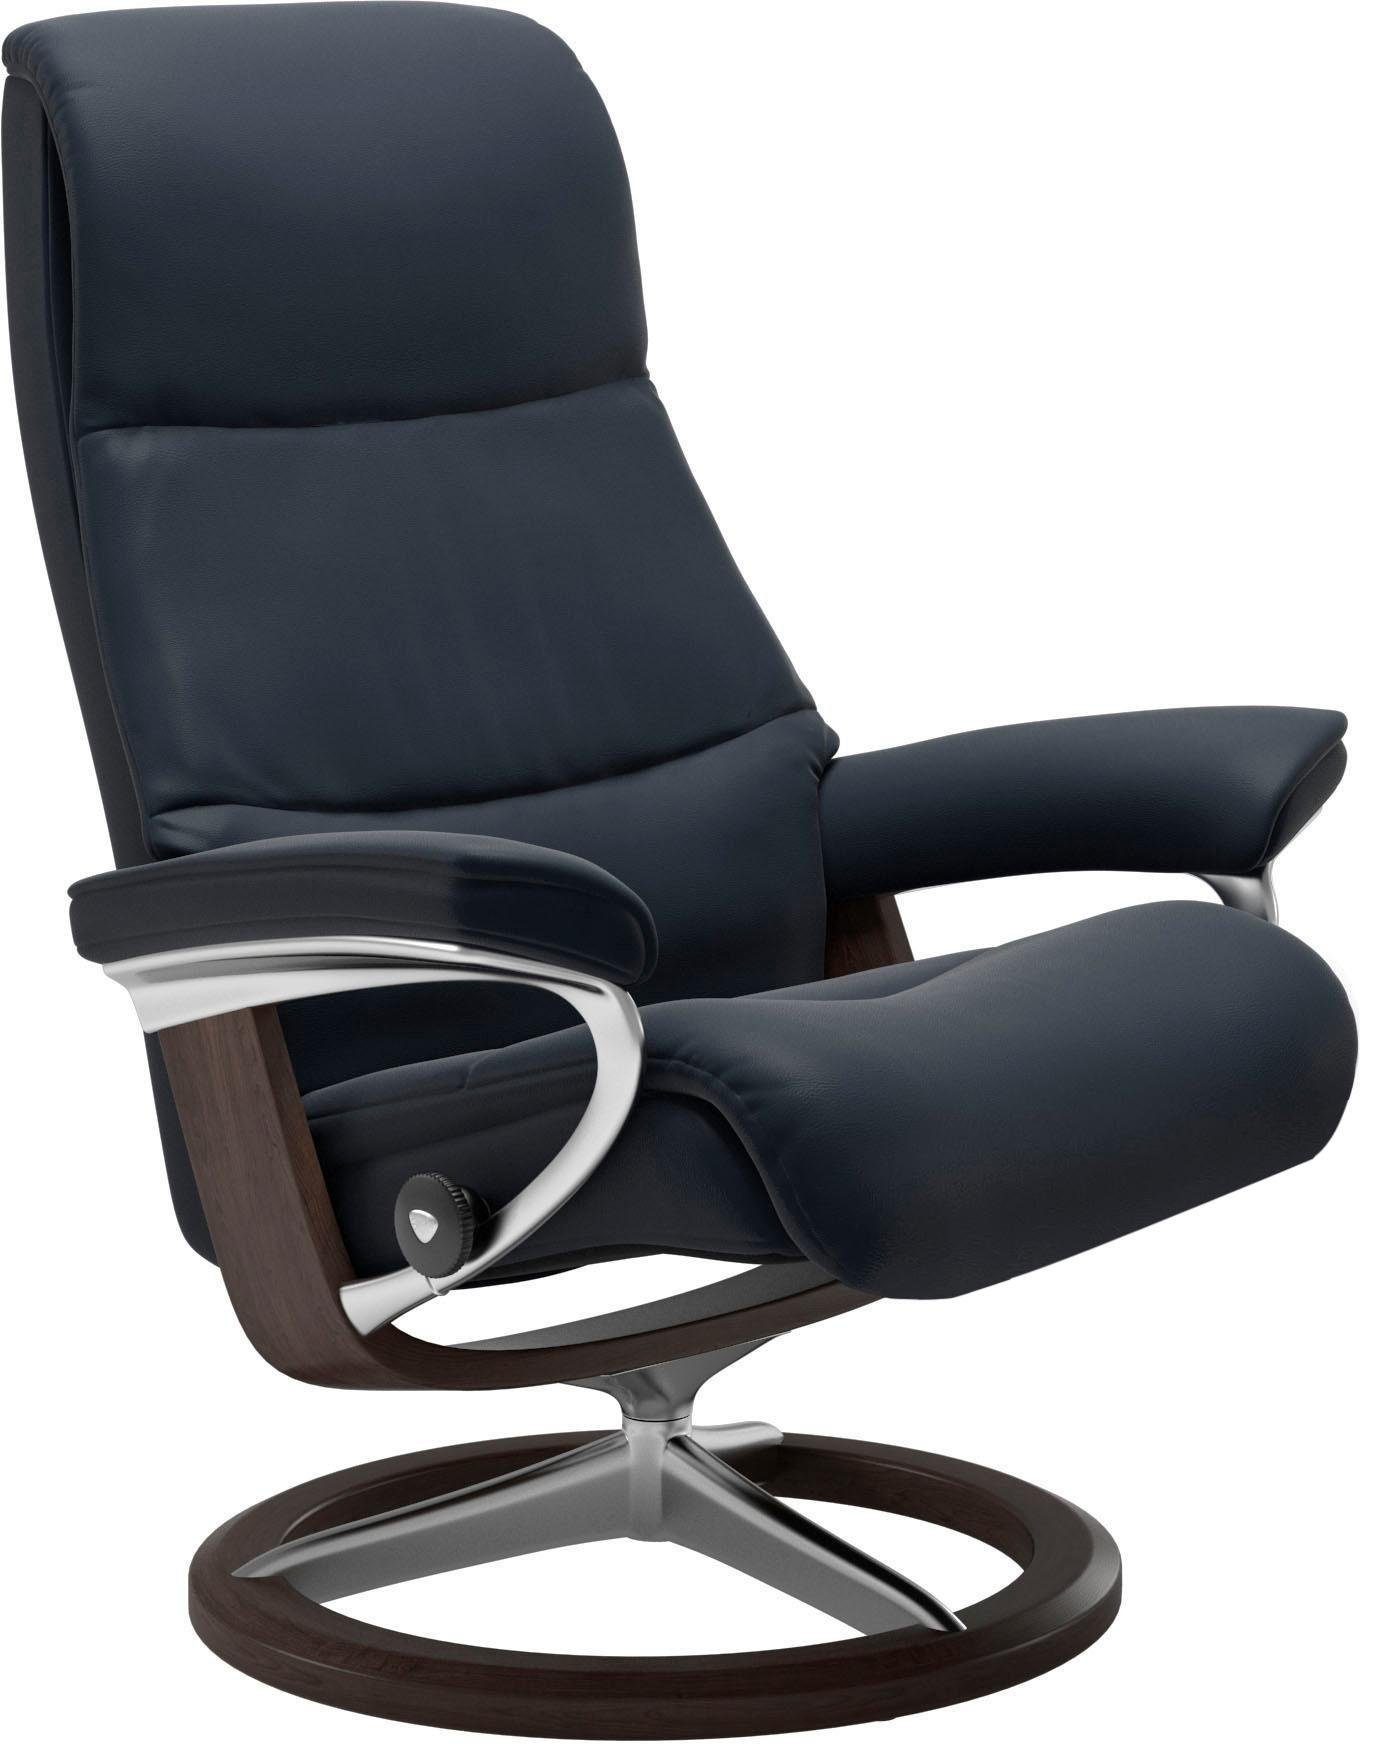 S,Gestell Signature View, Wenge Relaxsessel mit Stressless® Base, Größe